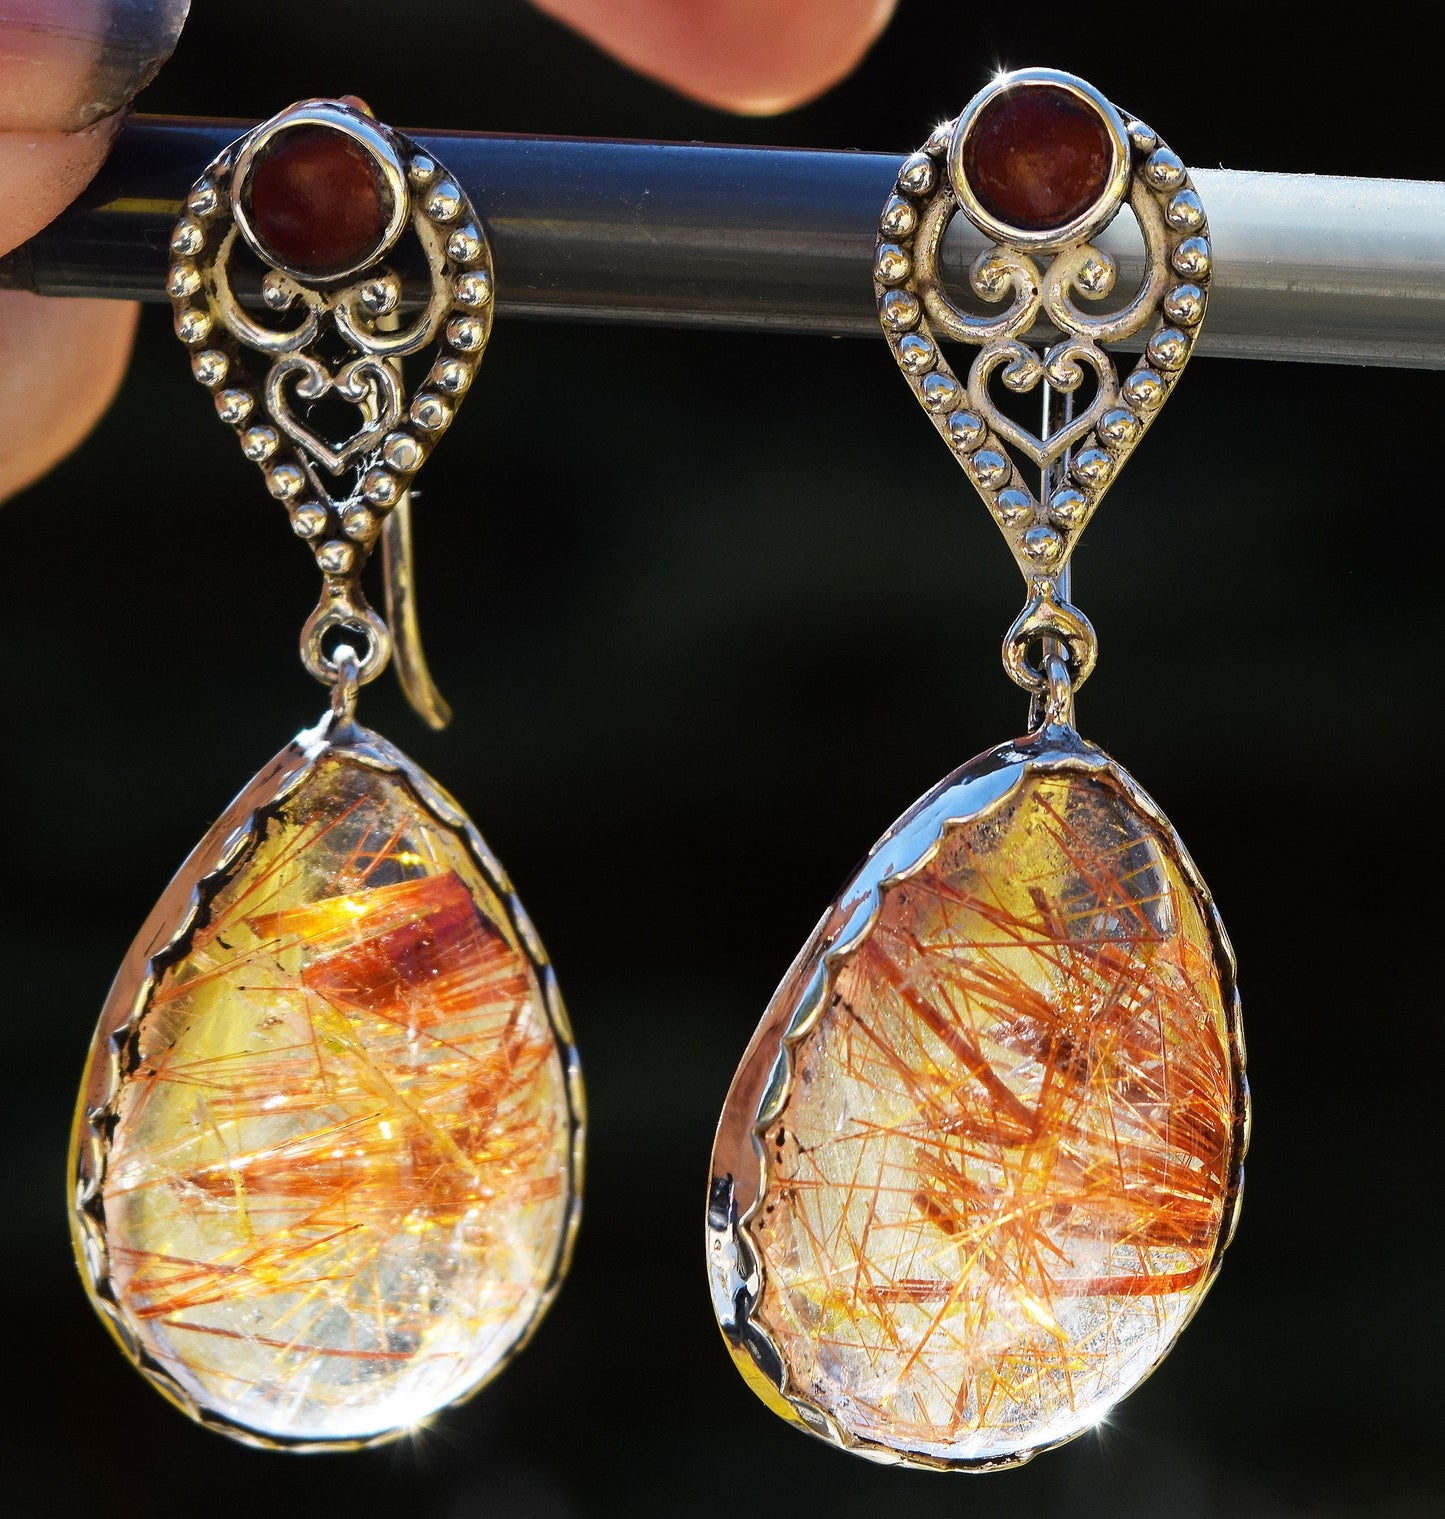 Beautiful, Matched Rutilated Quartz and Sacred Pipestone earrings with French Hook earwires.